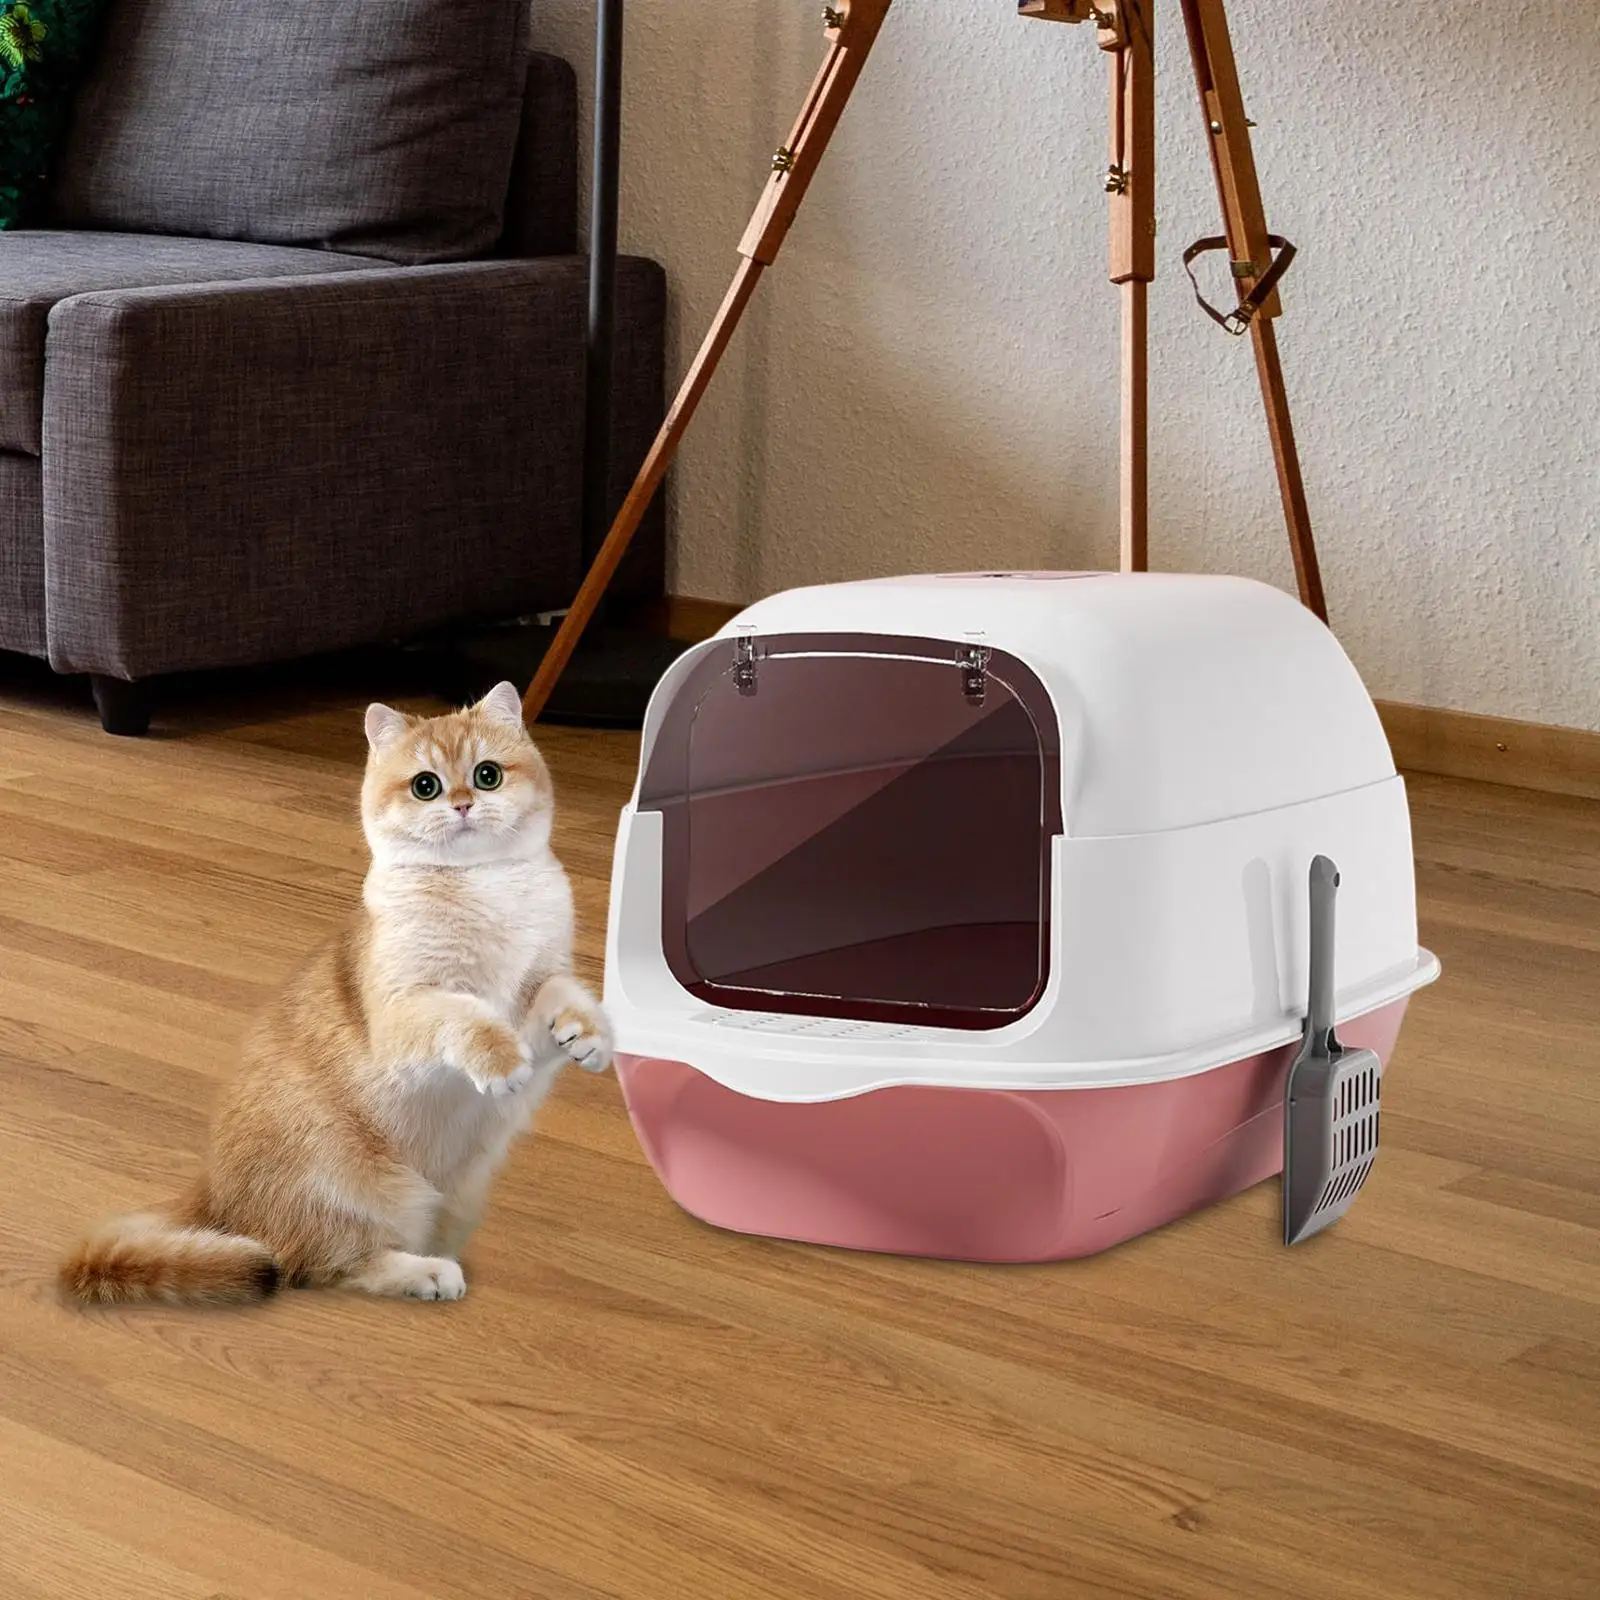 Hooded Cat Litter Box Large Cat Toilet with Shovel Durable Large Cat Litter Box Detachable with Door Hooded Cat Litter Tray